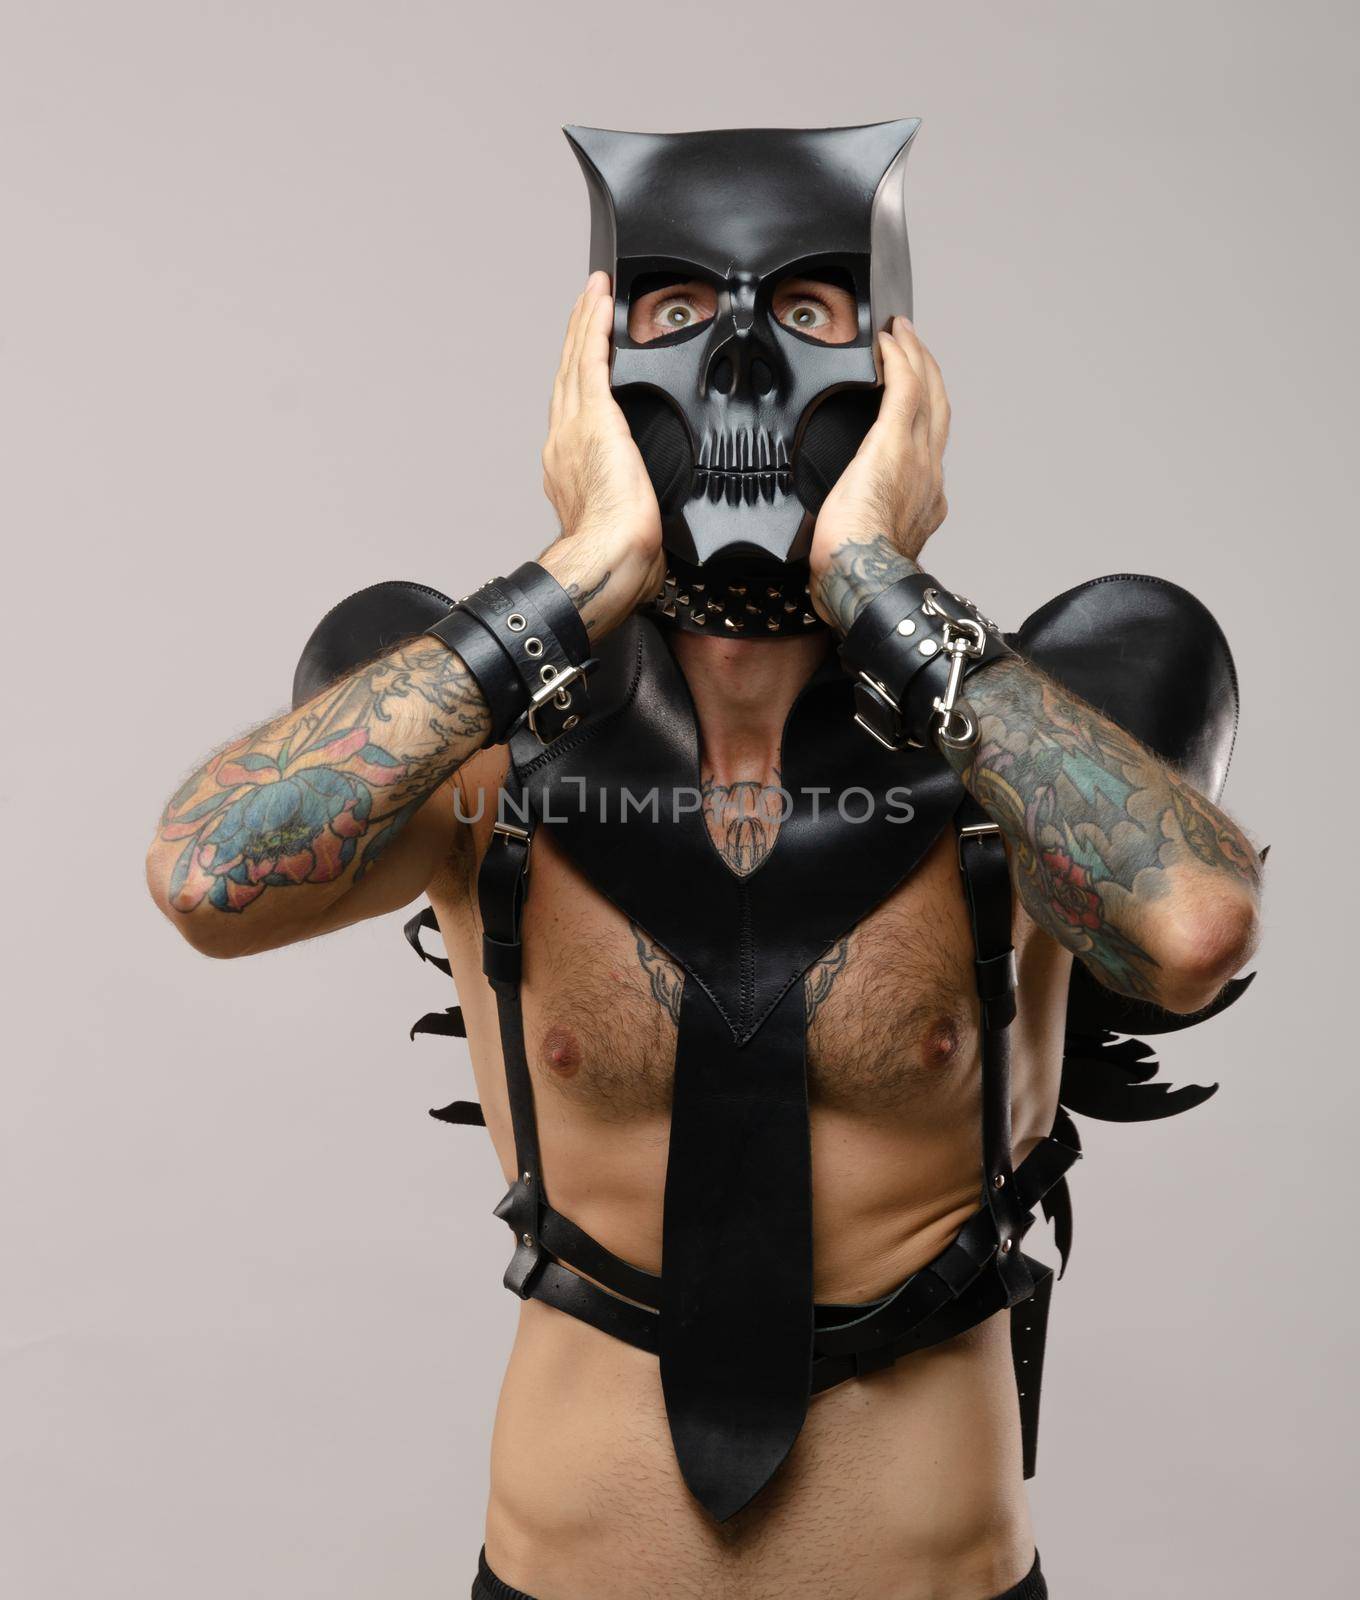 the man in a bdsm mask of a demon-skull, dressed in leather with leather bracelets and belts